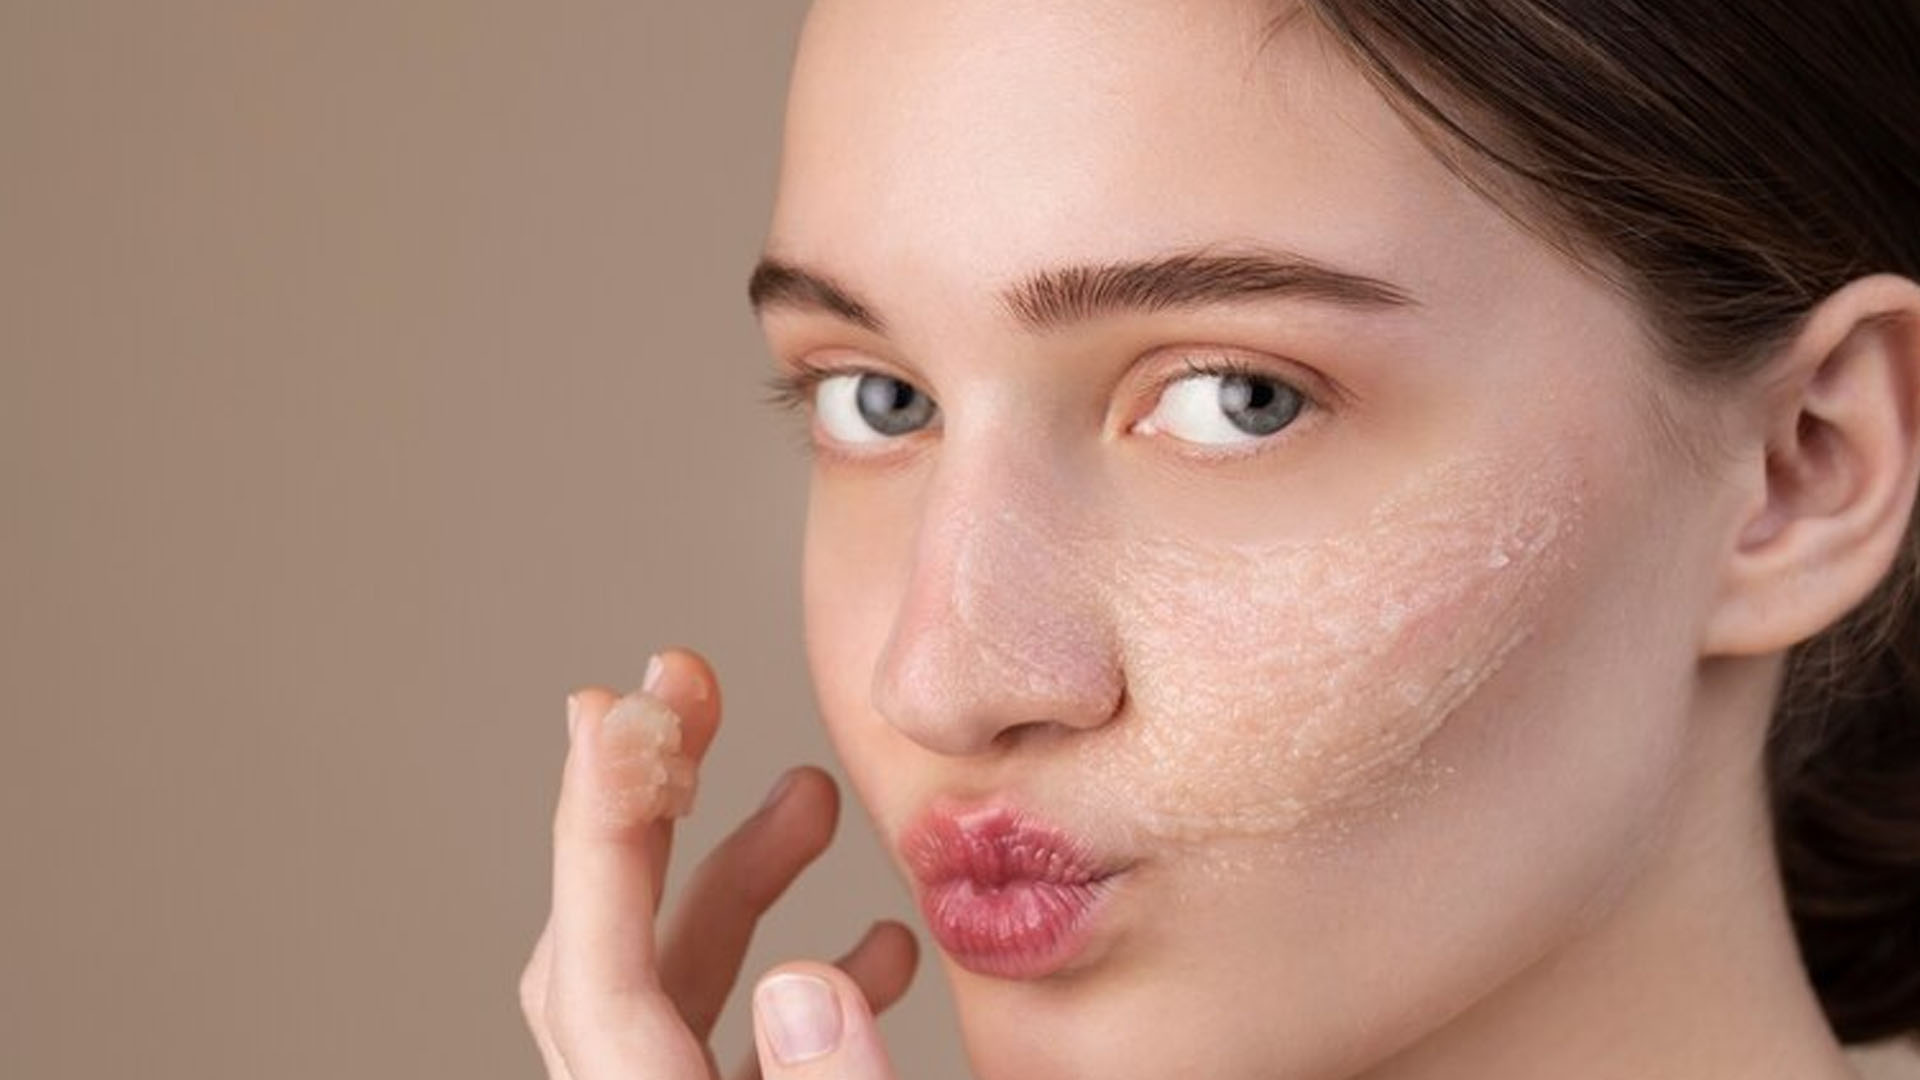 What are the Home Remedies for Dry Skin?